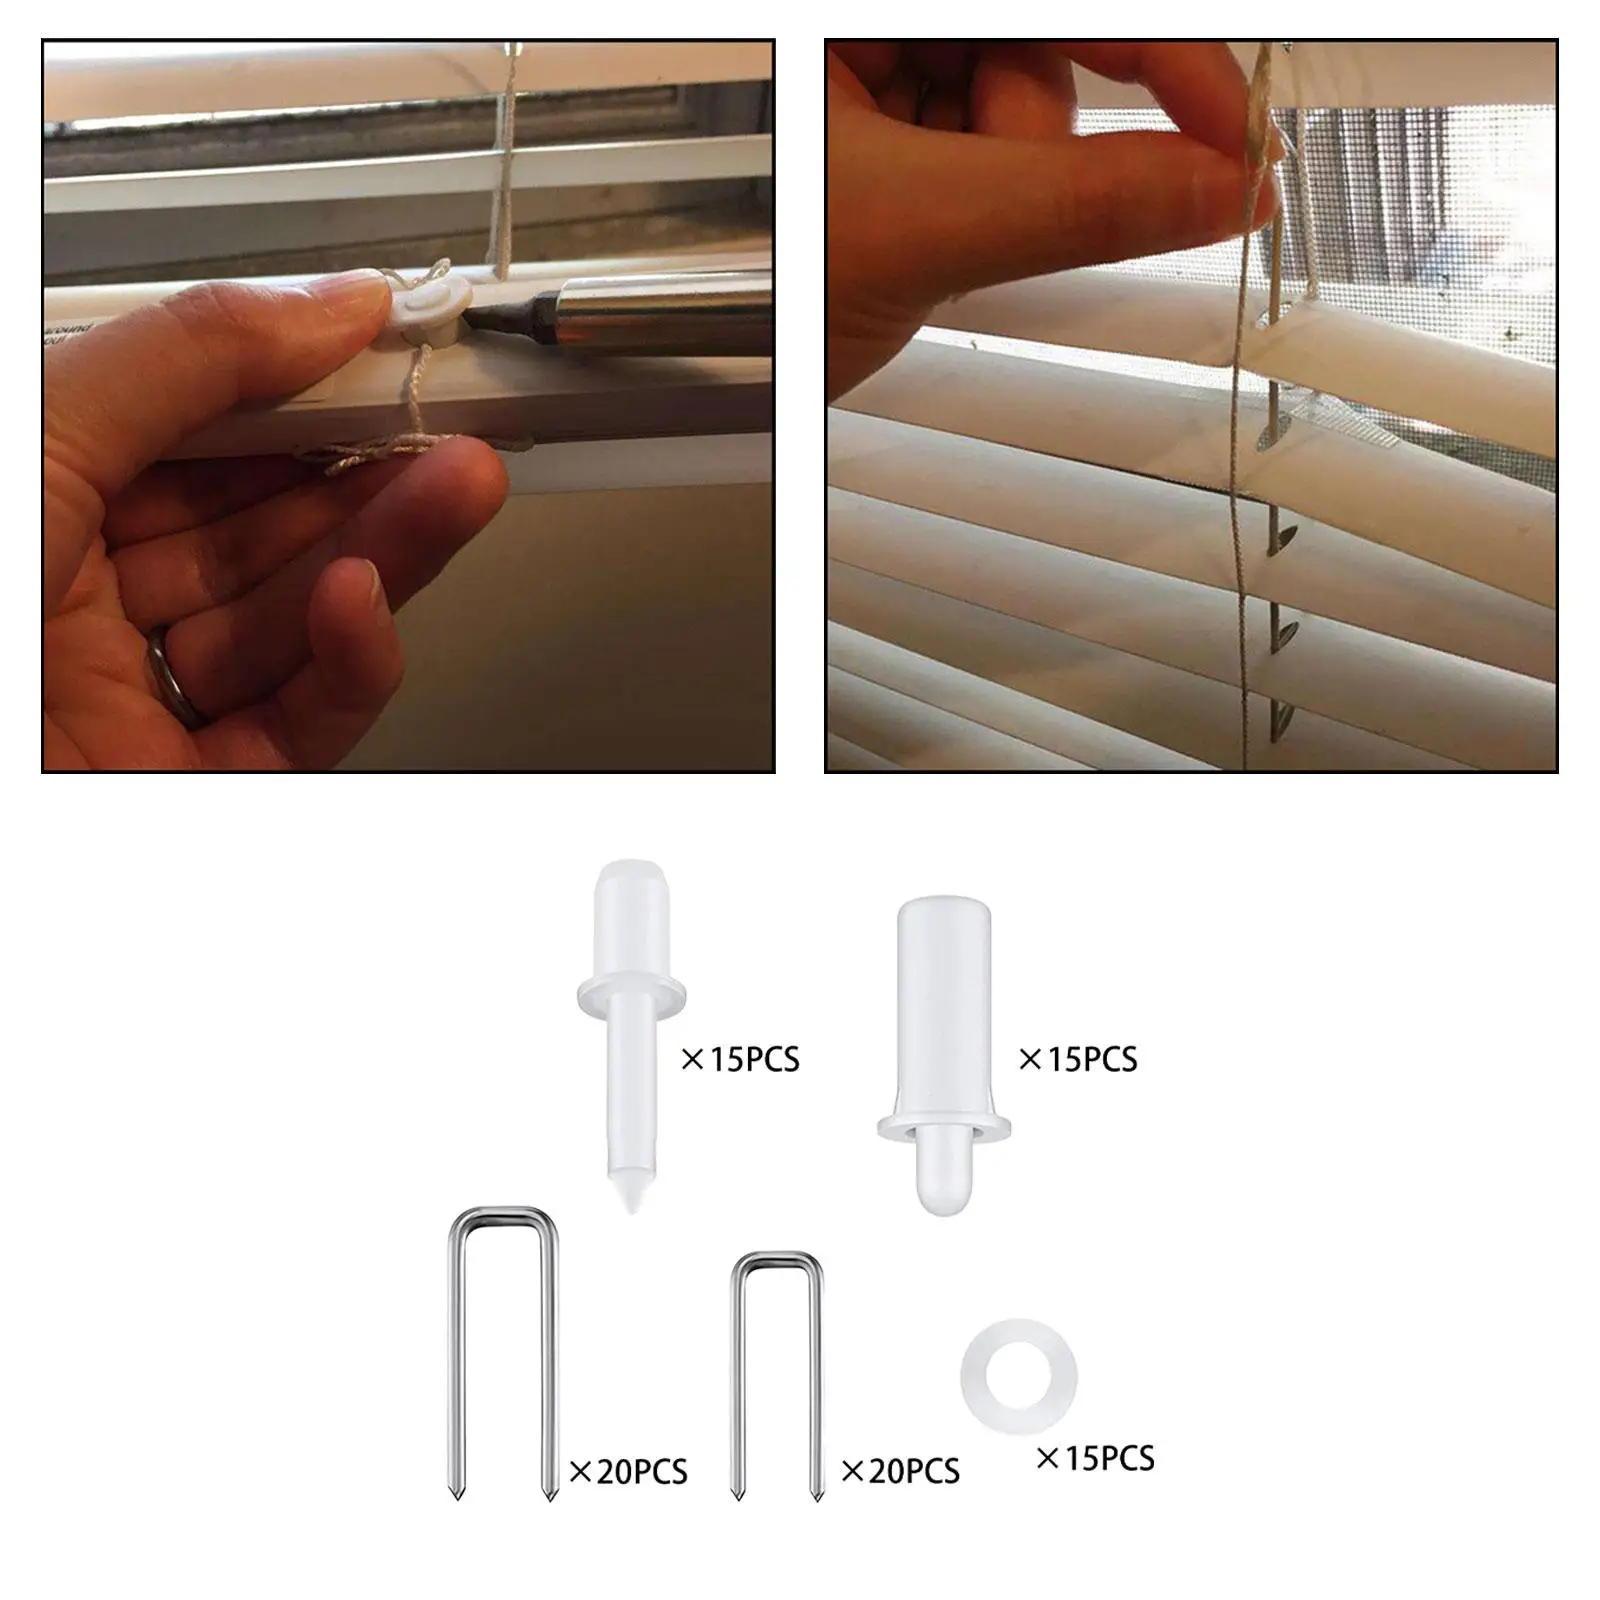 85 Pieces Repair Plantation Shutters Set Fittings Sturdy Durable easy to Use Replaces Louvers Staples for home curtain